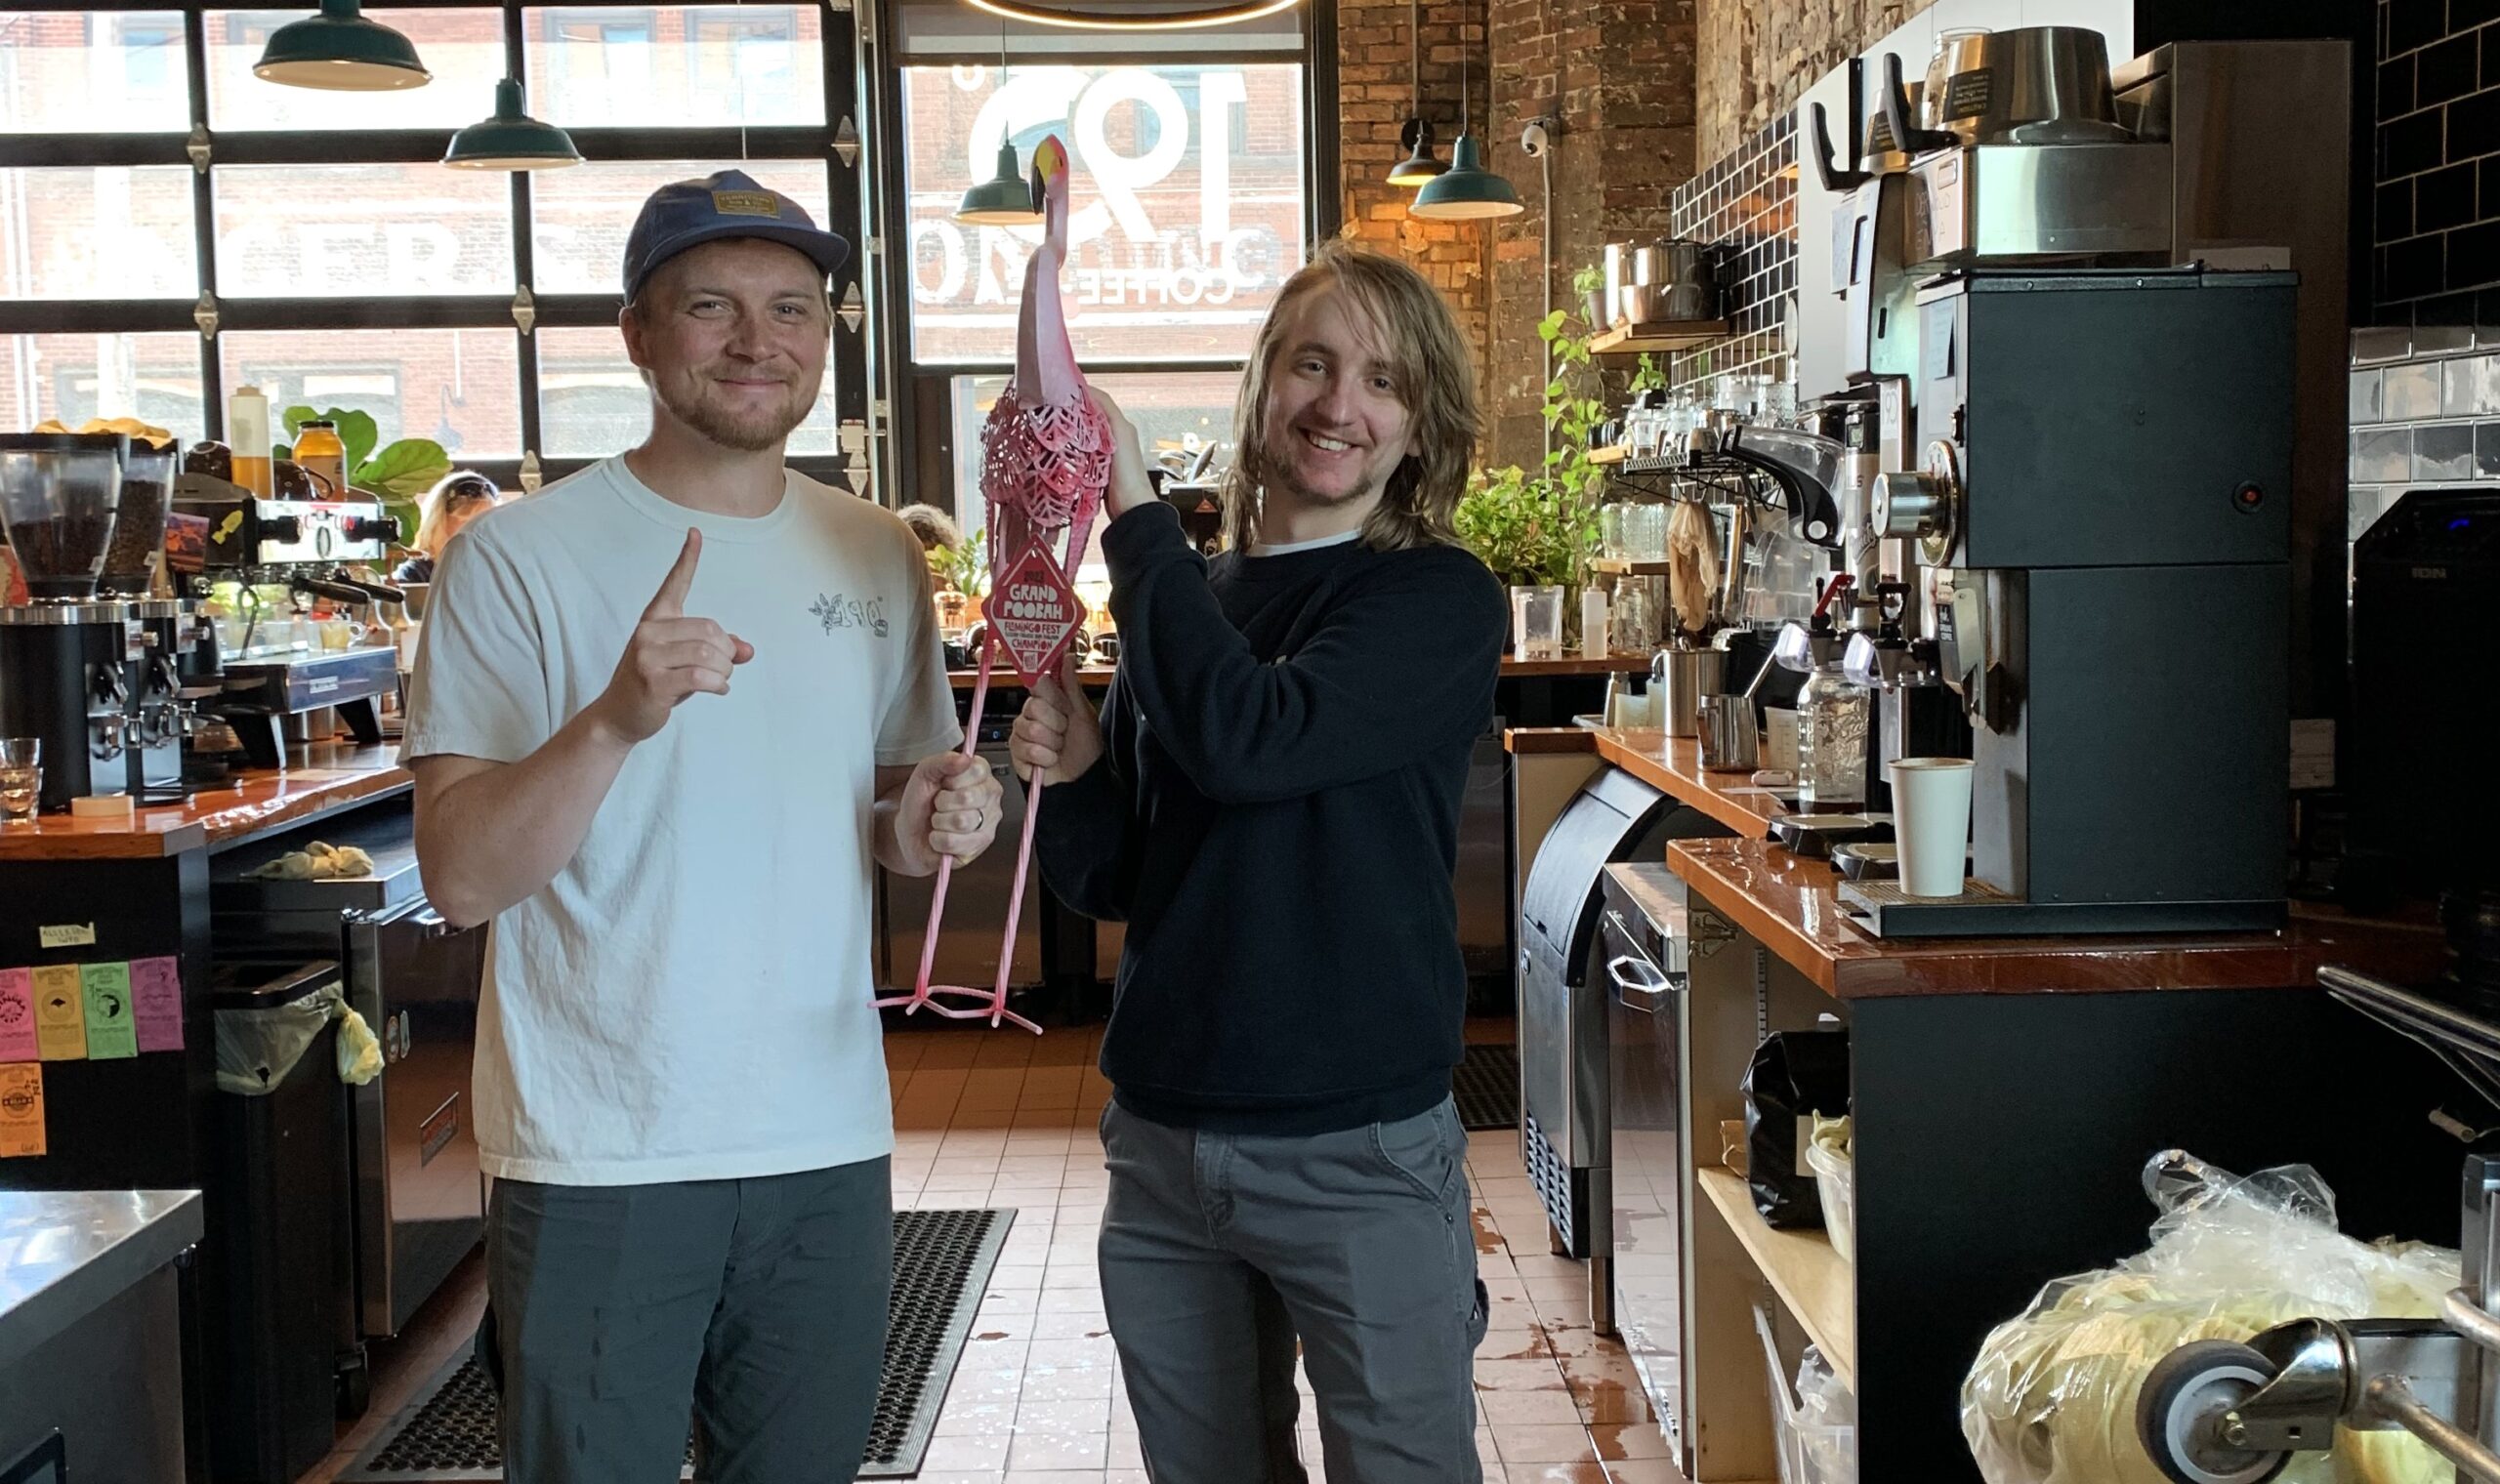 Two smiling people in a coffee shop hold up a large flamingo lawn ornament. One holds up a "number one" gesture.